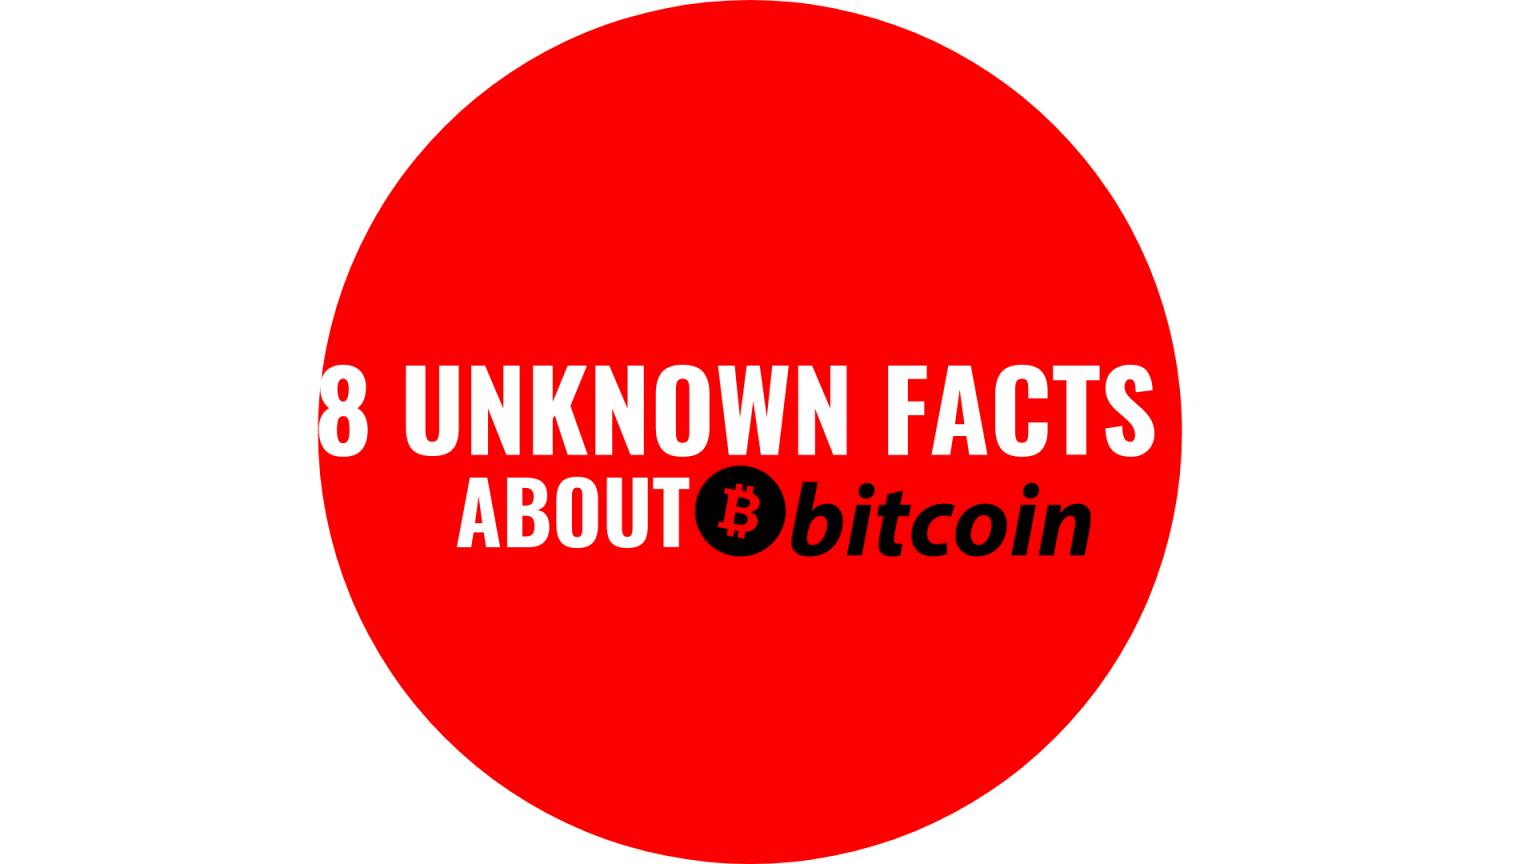 8 unknown facts about bitcoin